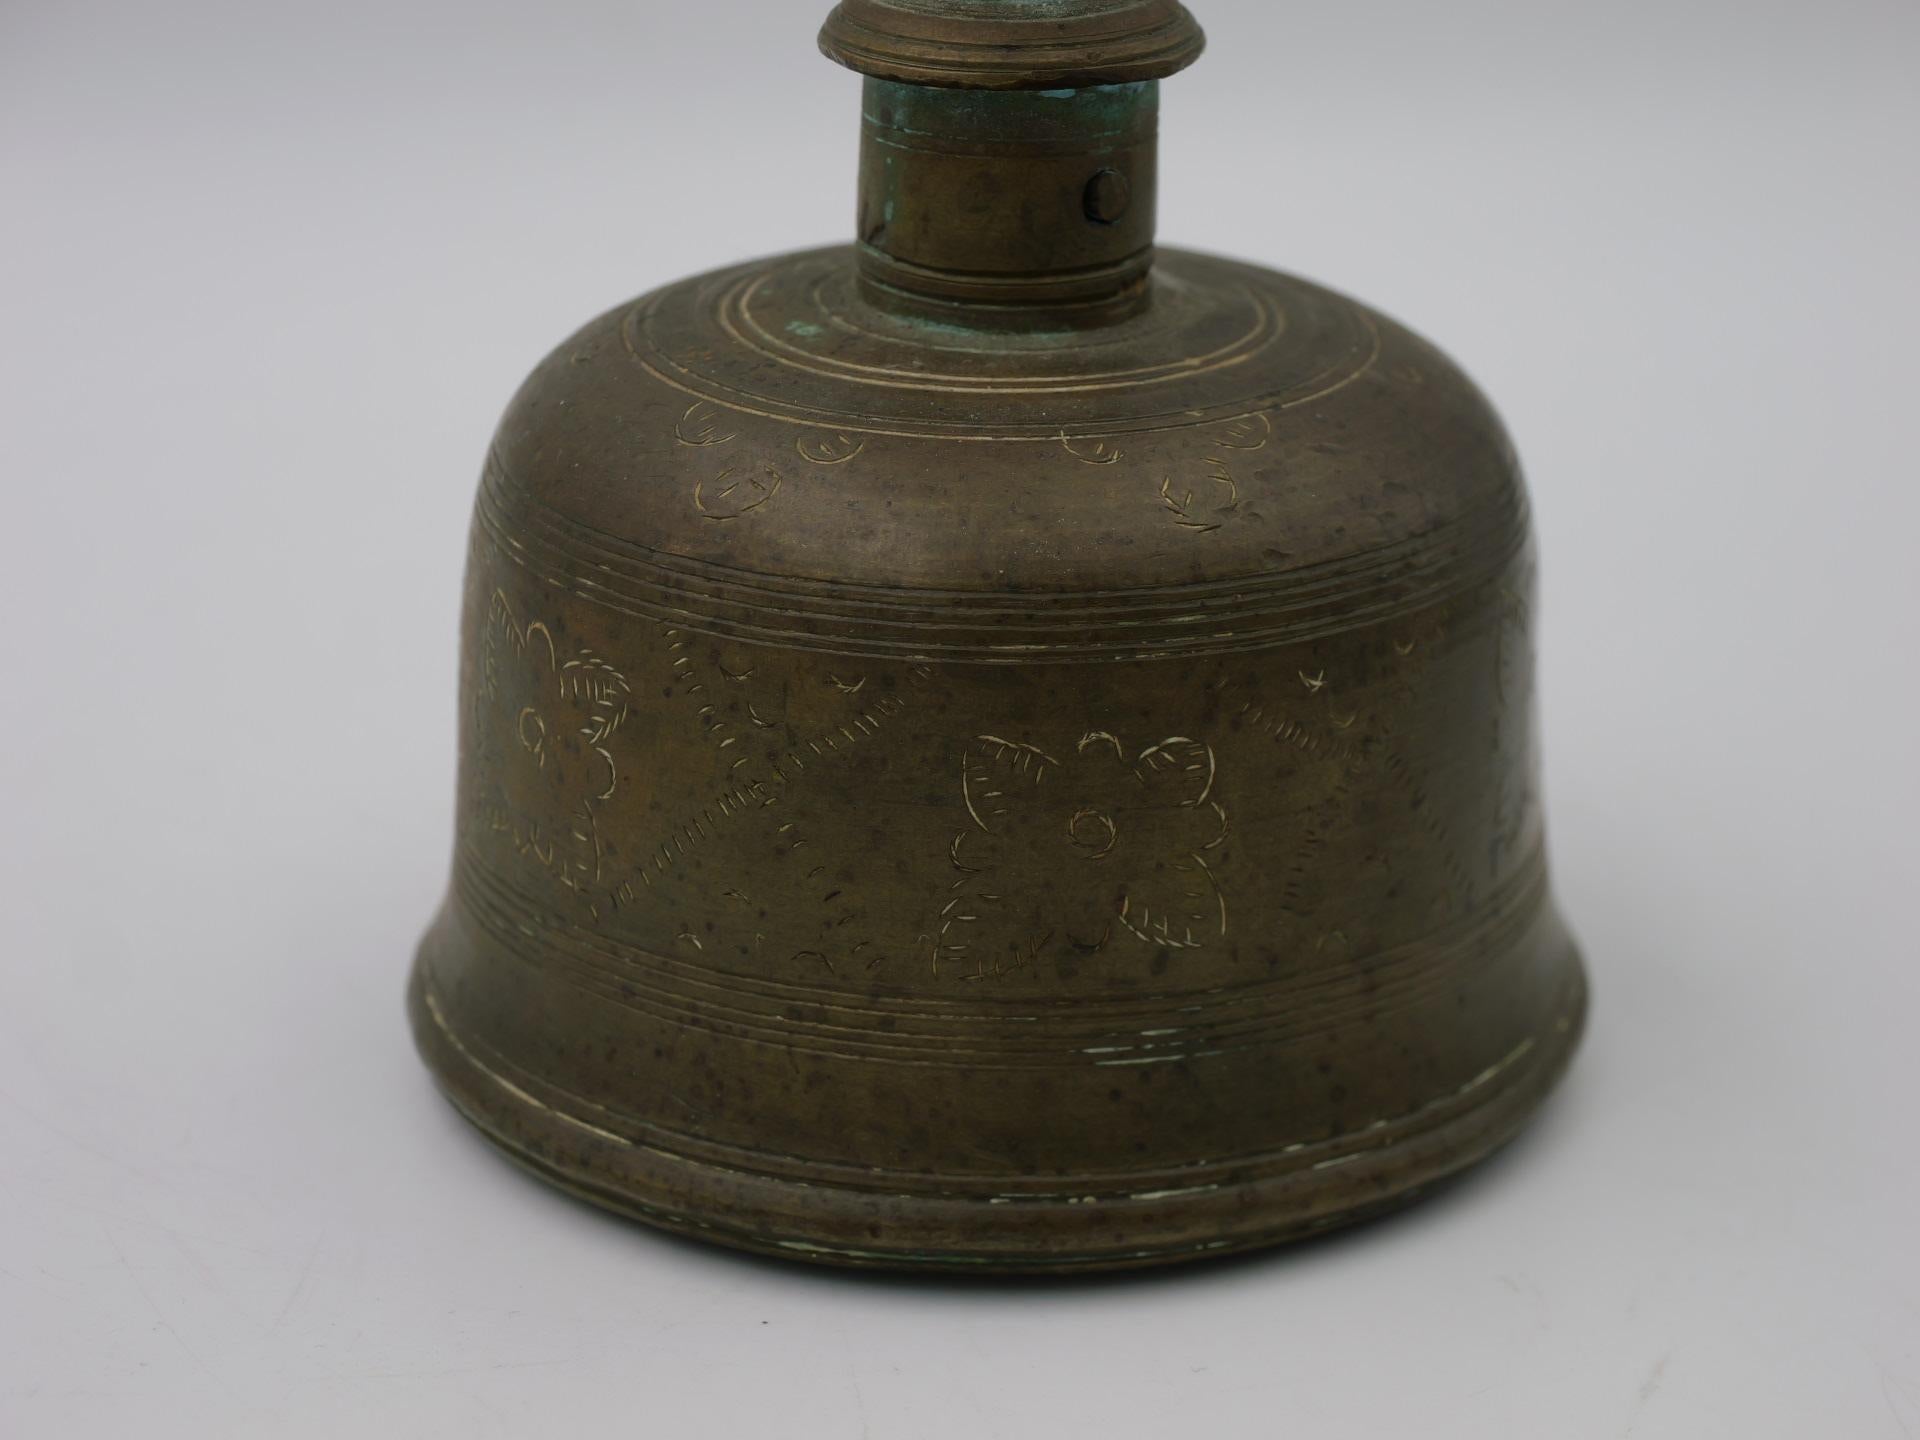 This Antique Indonesian brass bell holds a significant place in ceremonial practices conducted by priests. Crafted with meticulous detail, this bell showcases the traditional artistry of Indonesian craftsmanship. Made from aged brass, it emits a